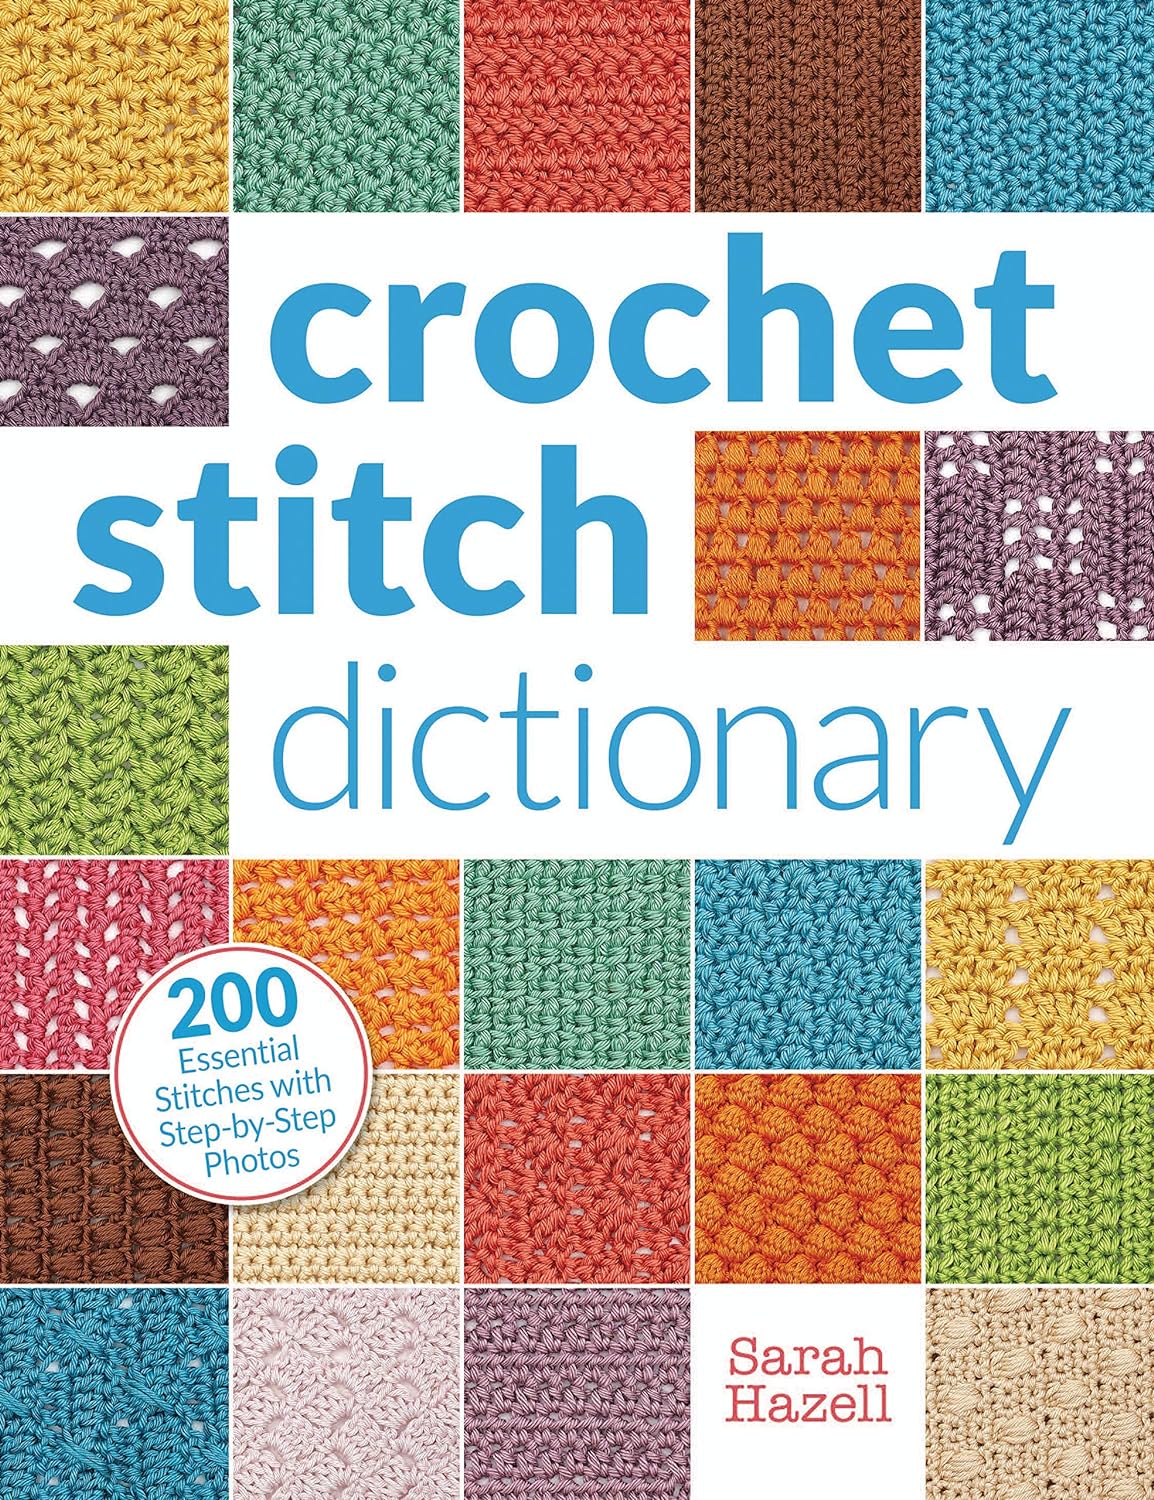 Crochet Stitch Dictionary - 200 Essential Stitches with Step-By-Step Photos - CA Corrections Bookstore